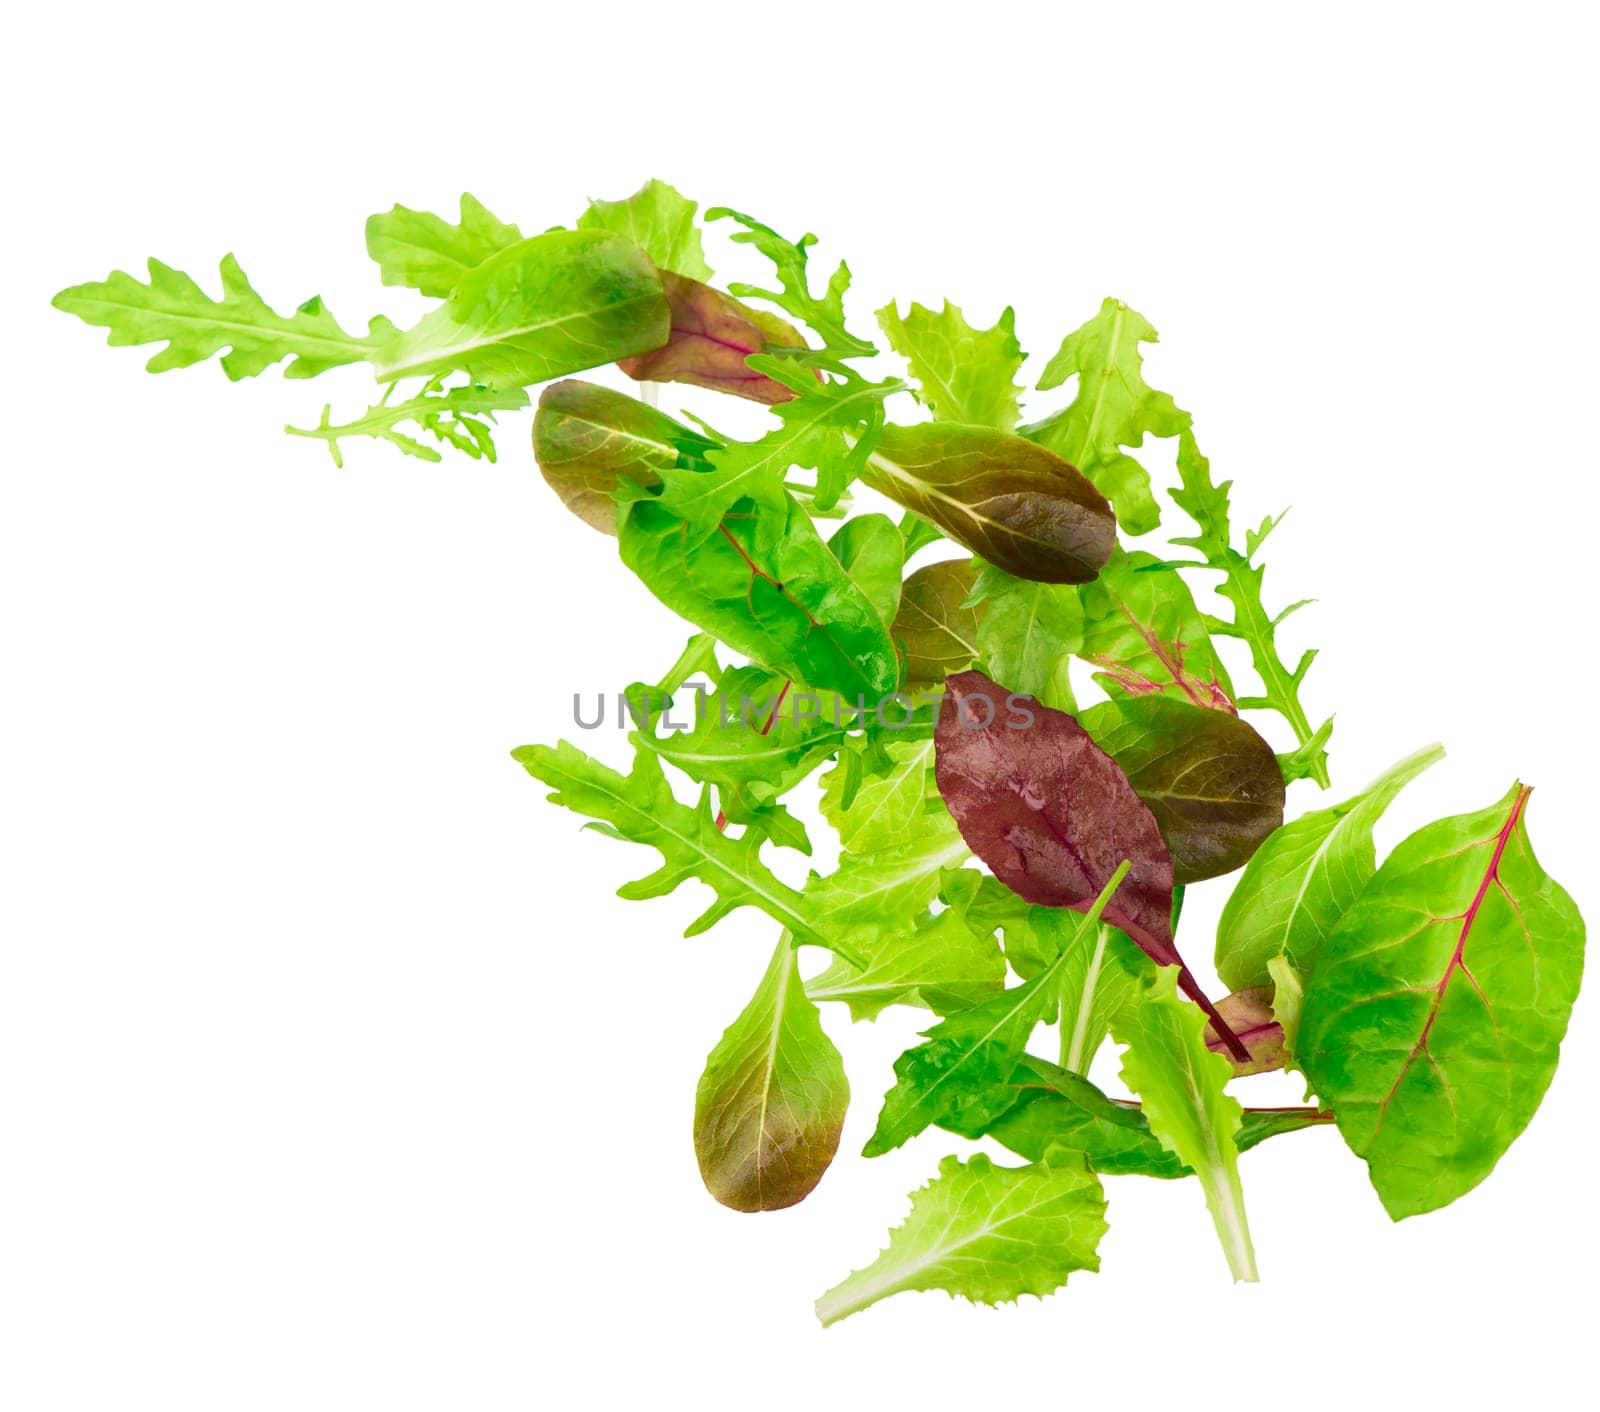 Green lettuce salad leaves pouring down isolated on white background by aprilphoto